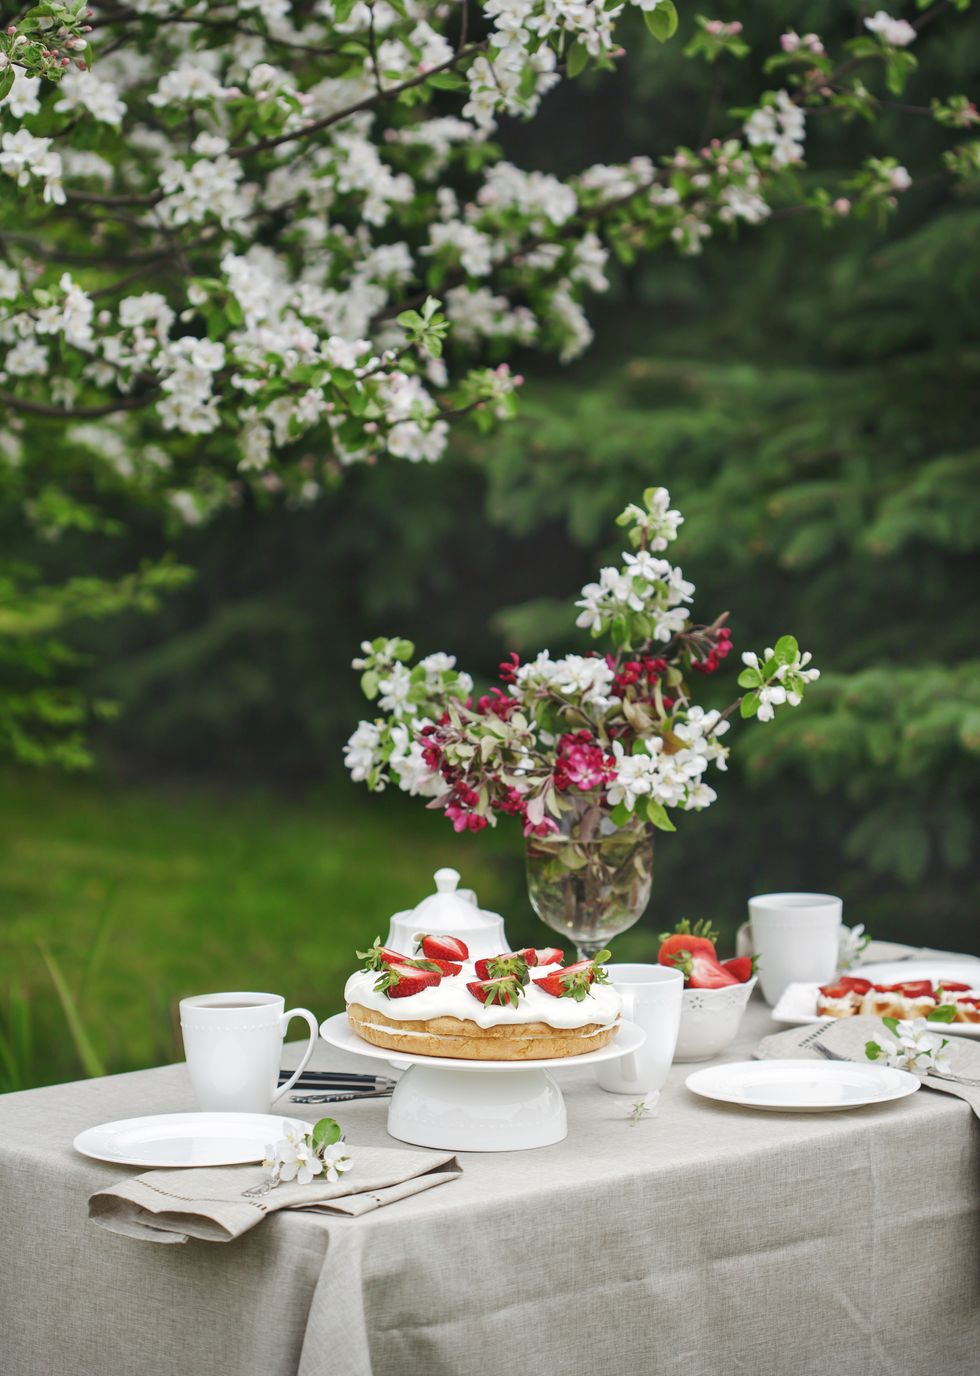 afternoon tea, cakes and bruschetta with ricotta and strawberry in the garden